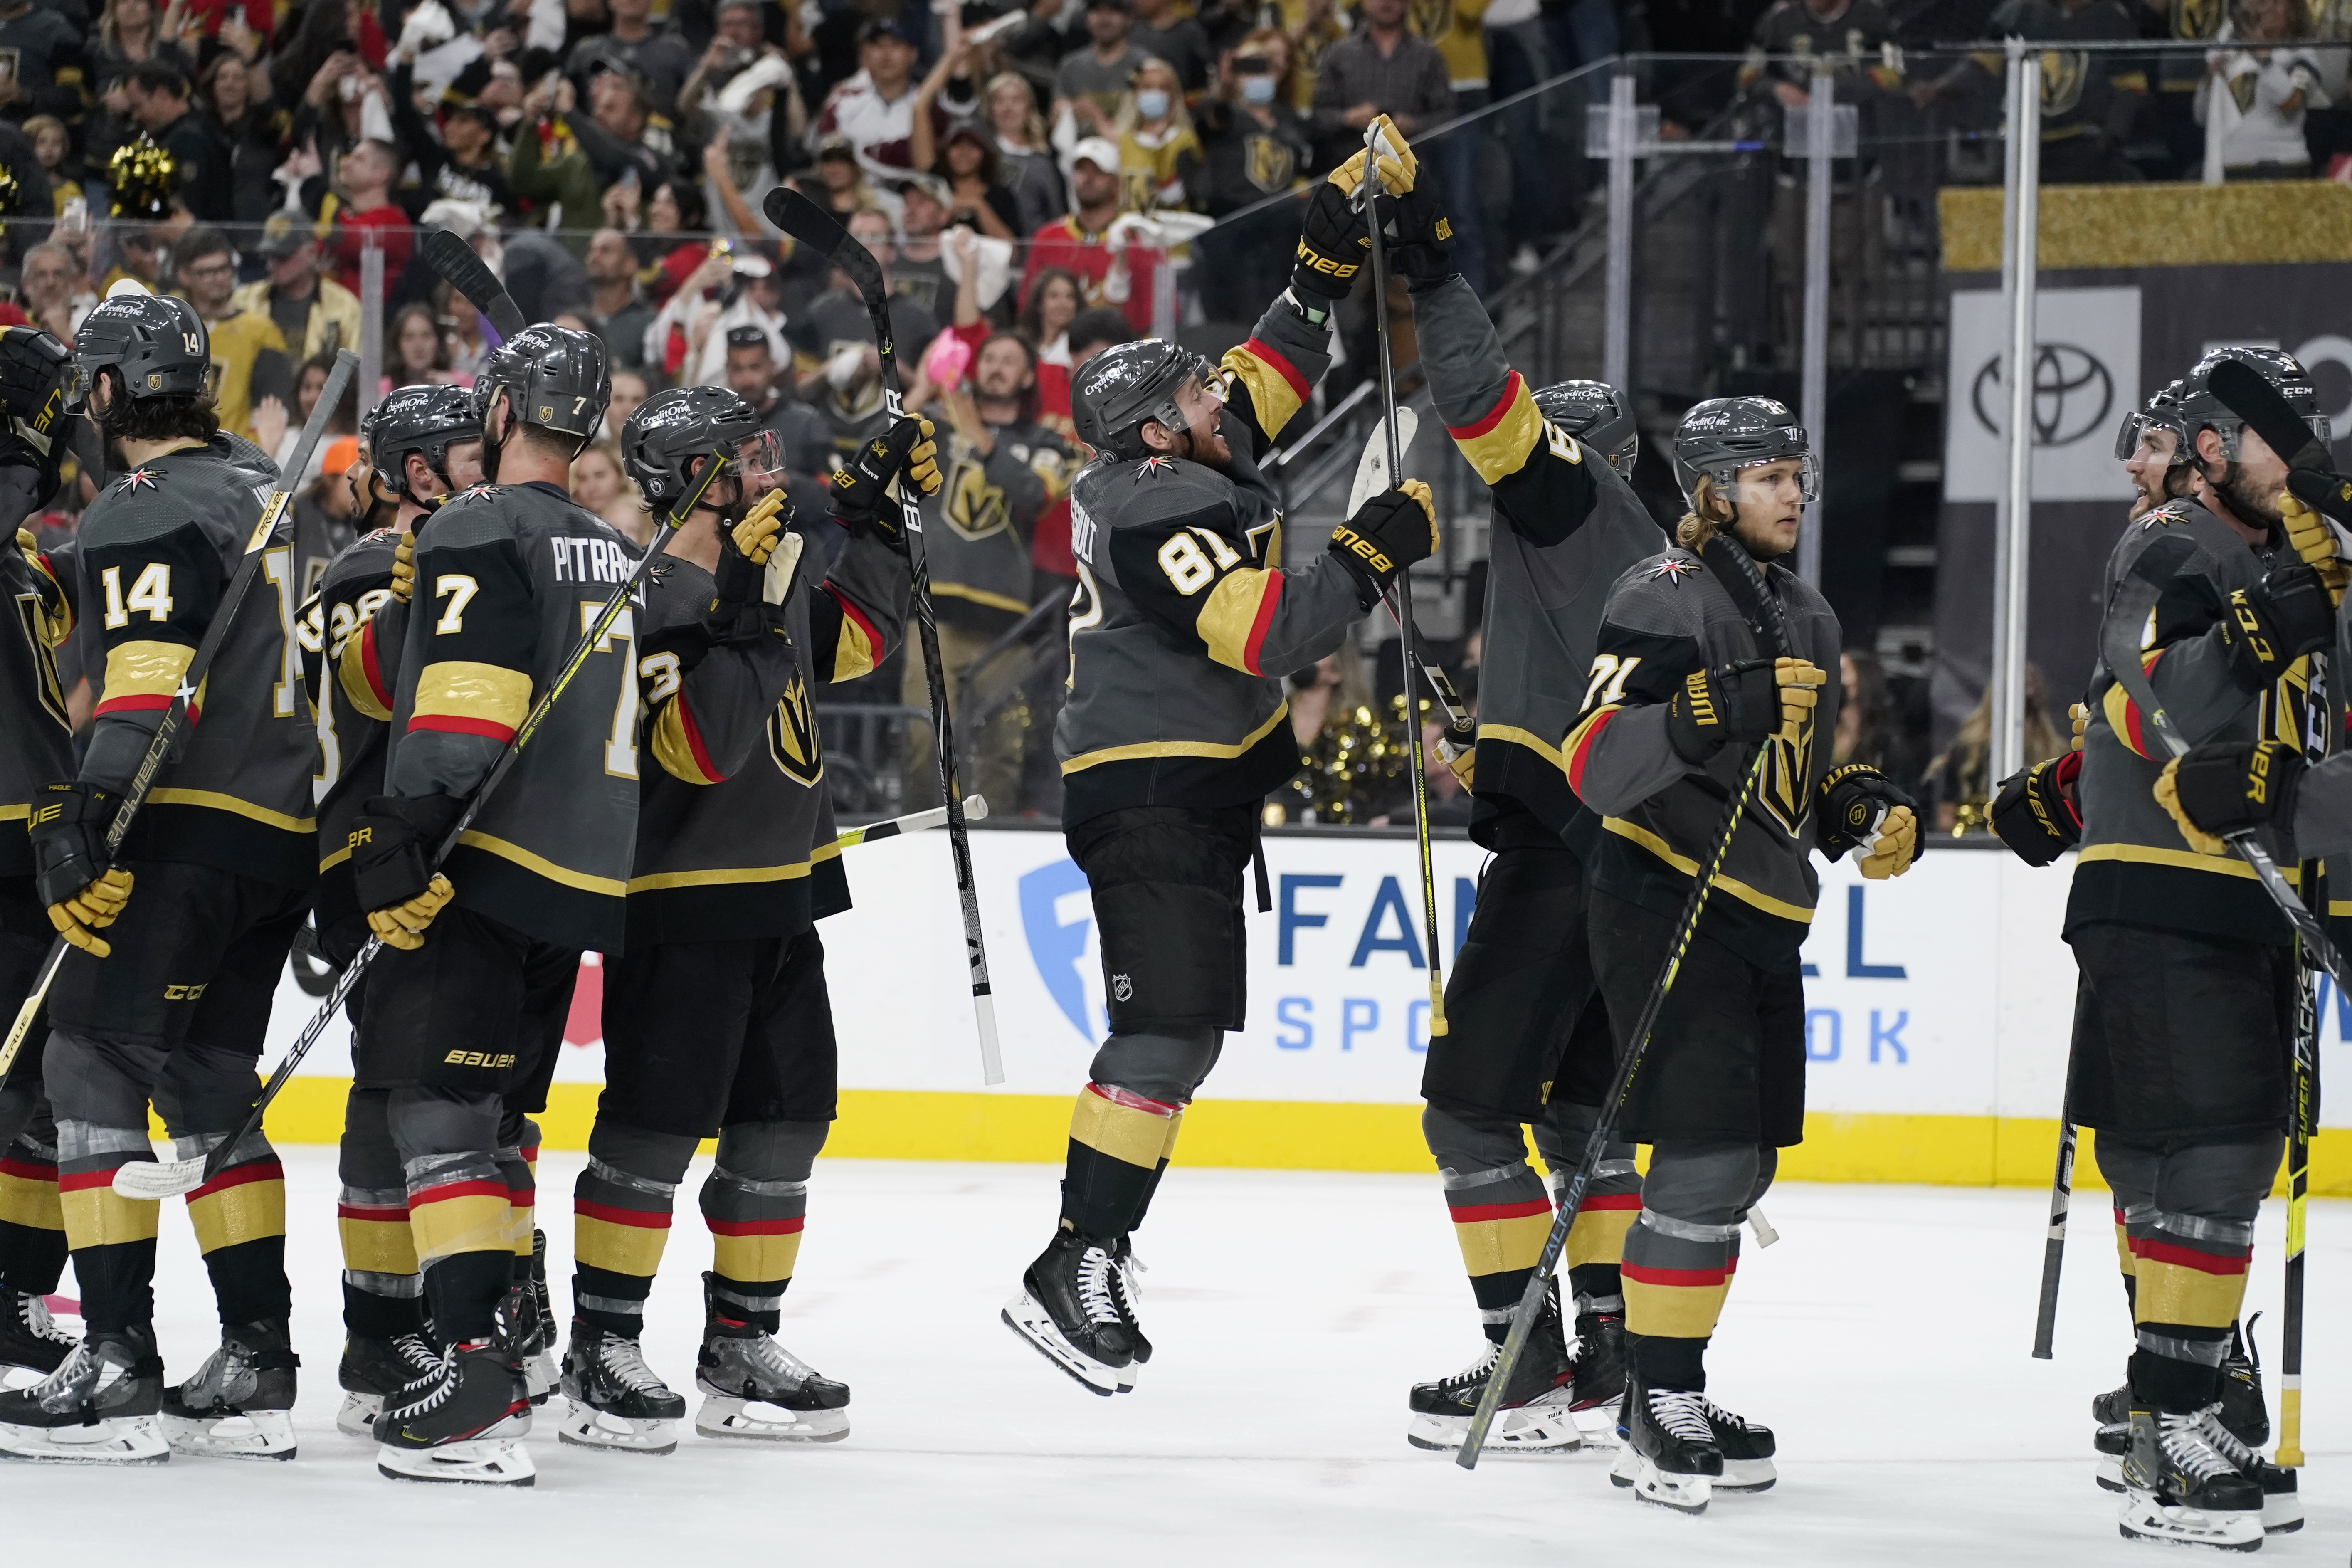 NHL playoffs How to LIVE STREAM FREEE the Vegas Golden Knights at Colorado Avalanche Tuesday (6-8-21)